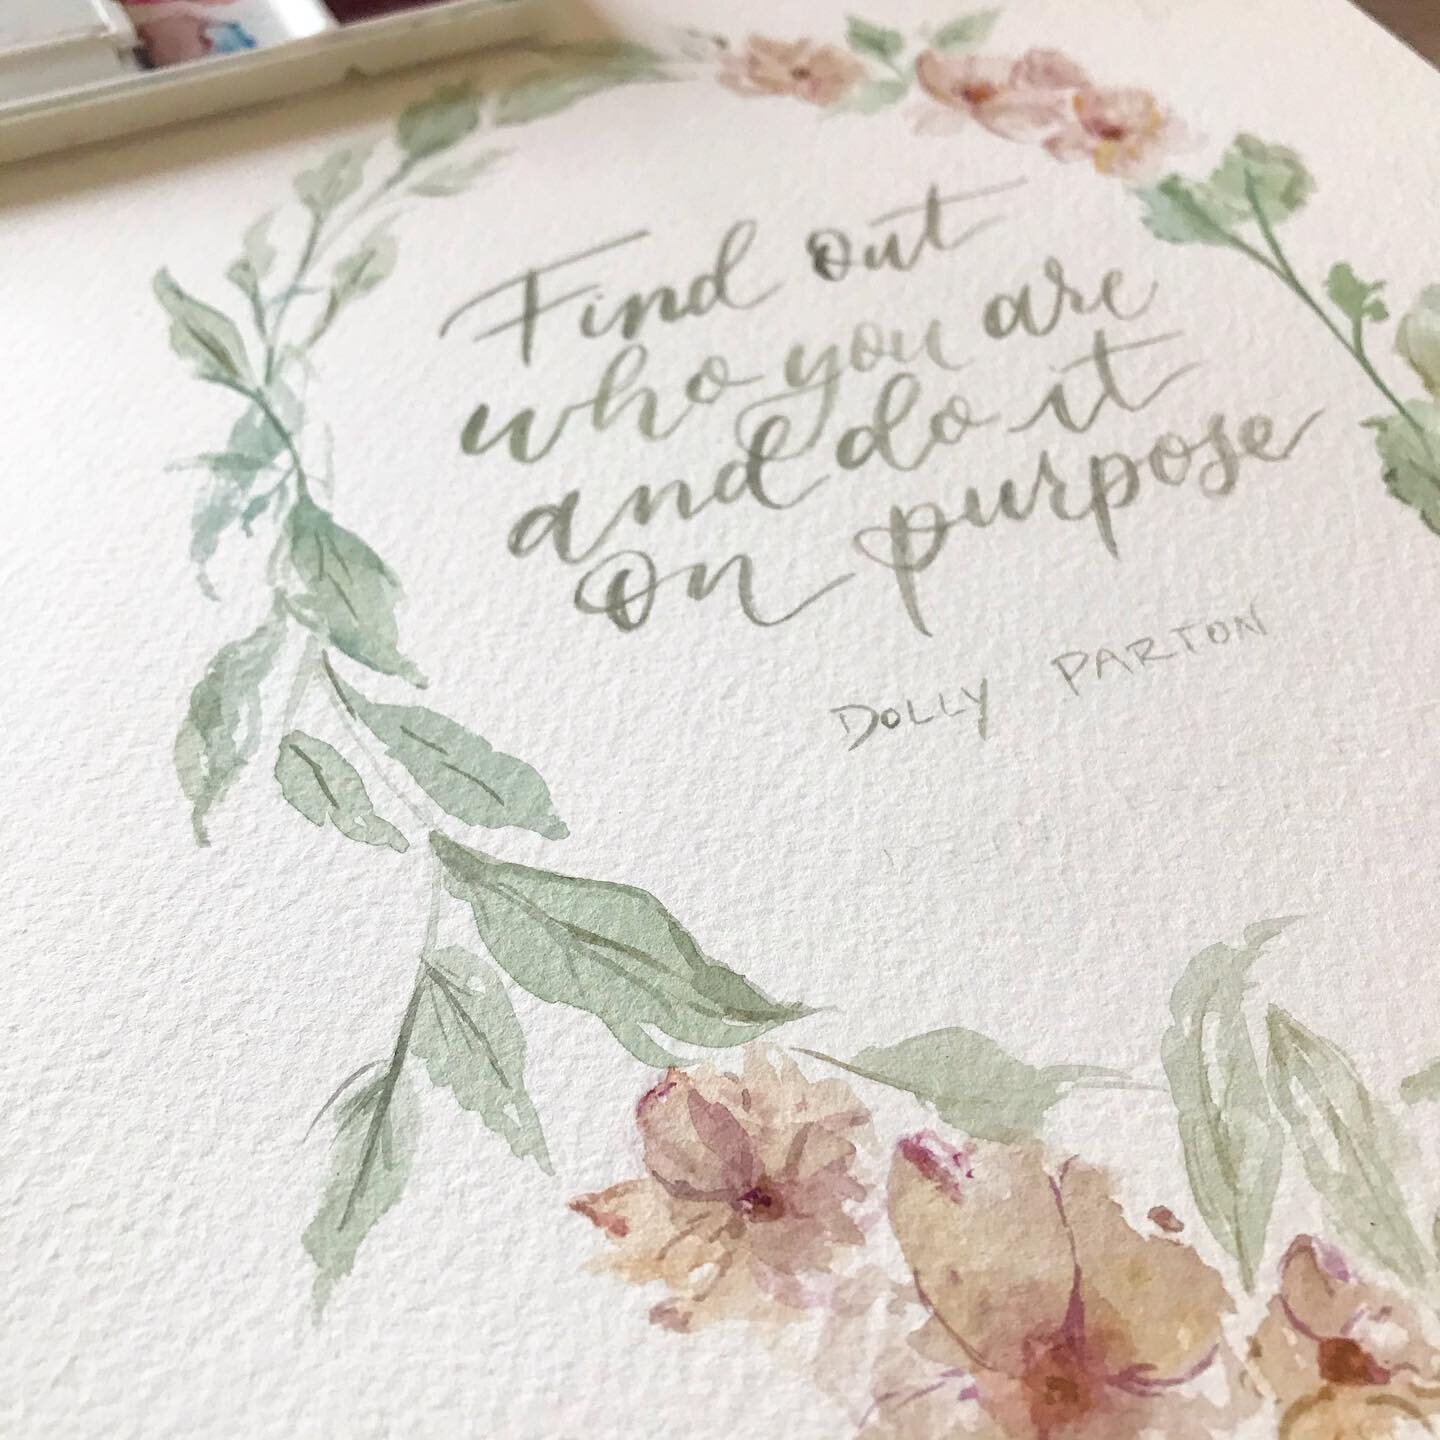 Words to live by 🙌 working on some new ideas over here and gearing up for an amazing event with @thebeautyboost_cleveland at the end of June. Big things coming soon! 

.
#painting #paint #dollyparton #dolly #wordstoliveby #beyou #beyourbestself #wat